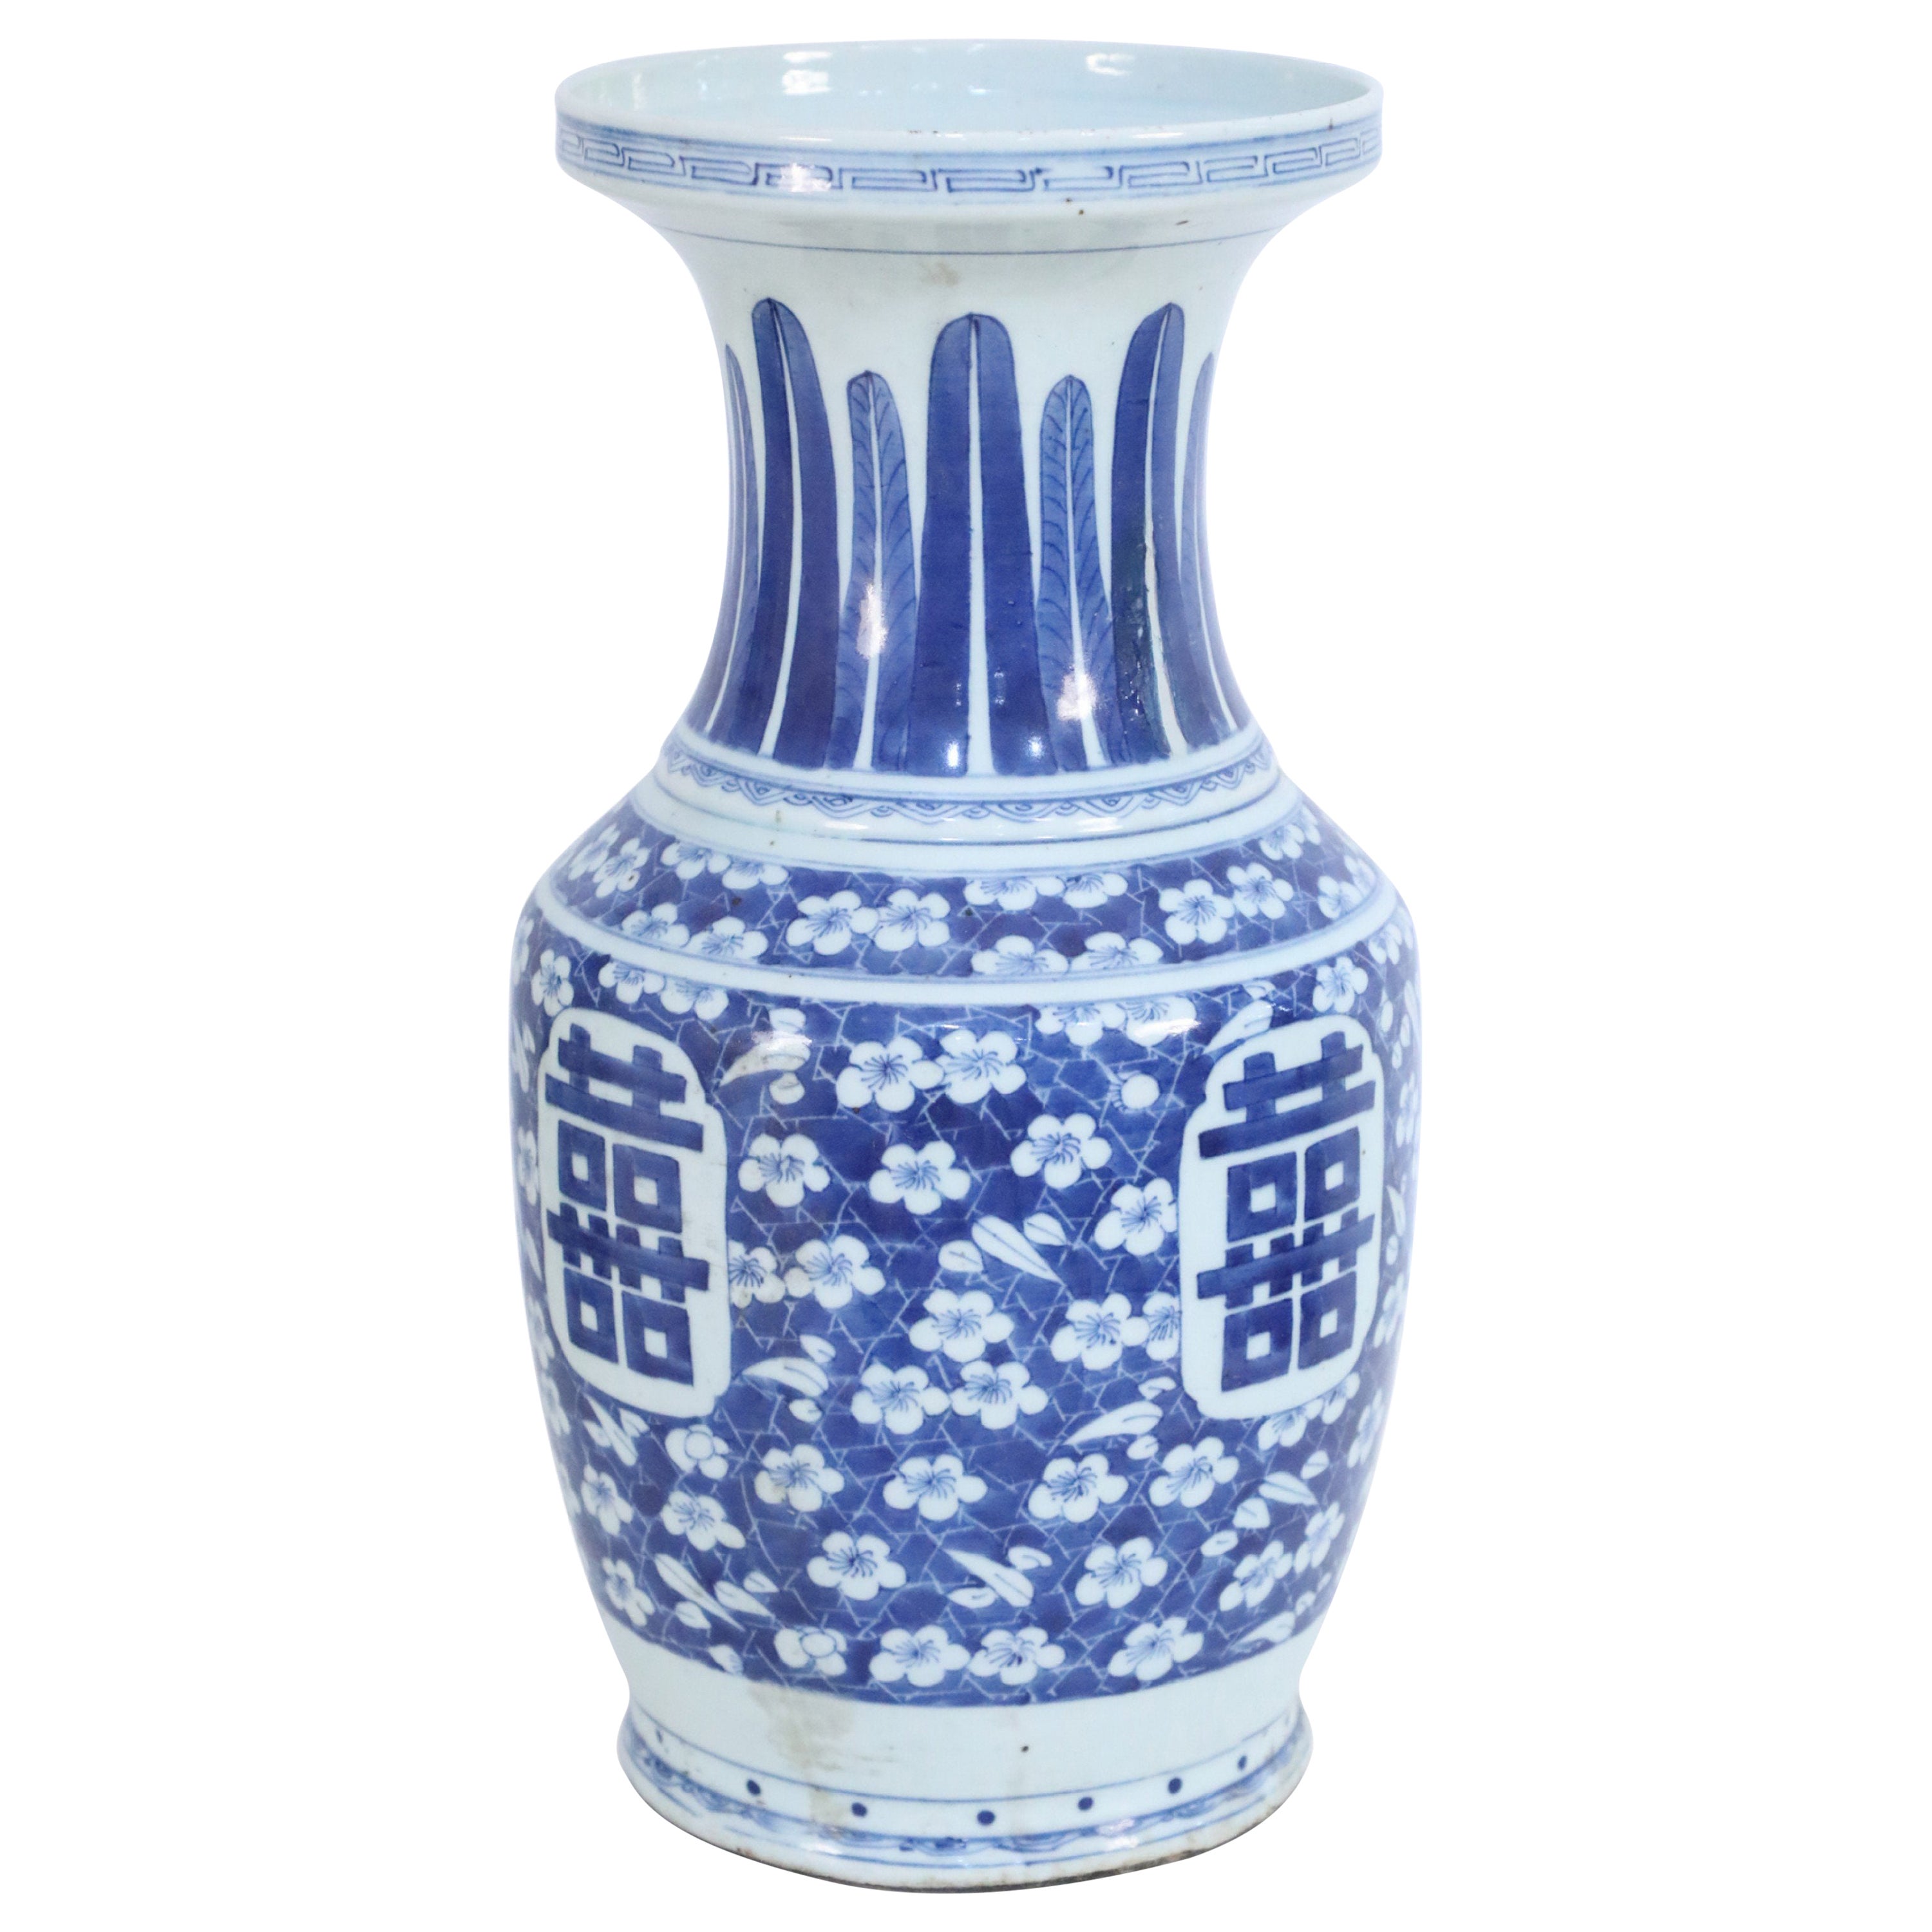 Chinese White and Blue Feather and Floral Motif Porcelain Urn